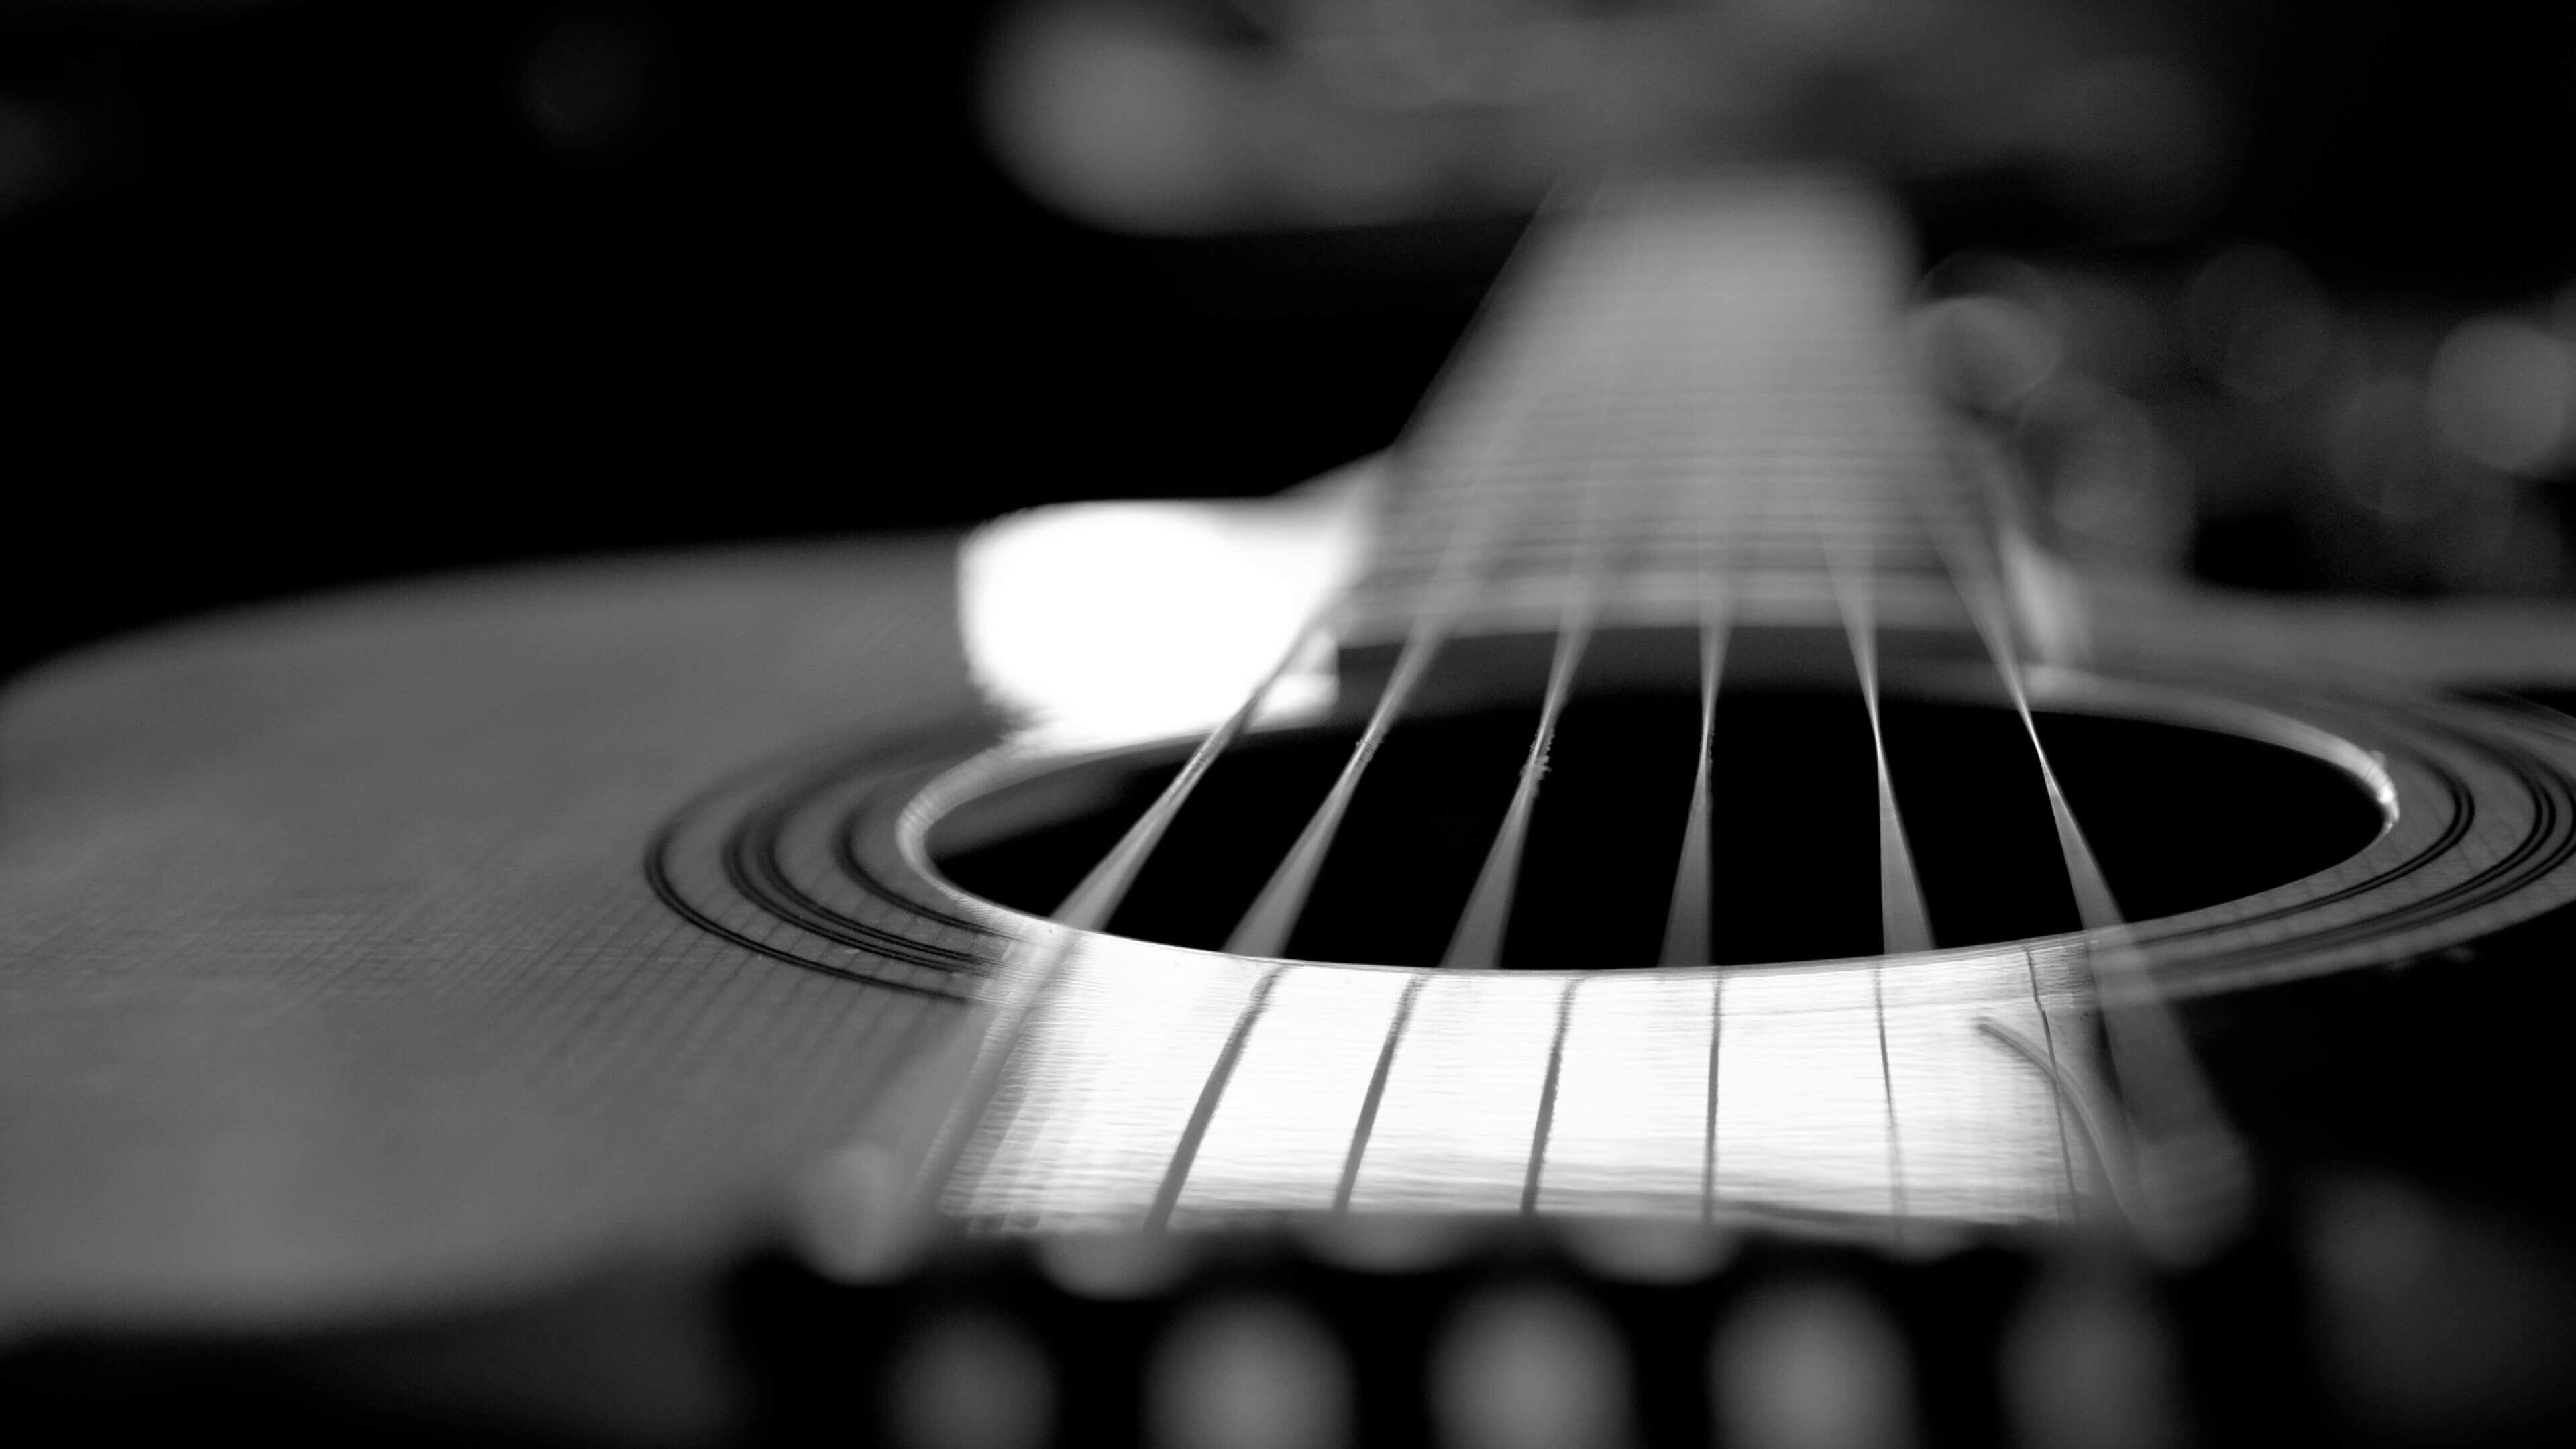 3840x2160 HD wallpaper: guitar, acoustic guitar, stringed instrument, musical instrument